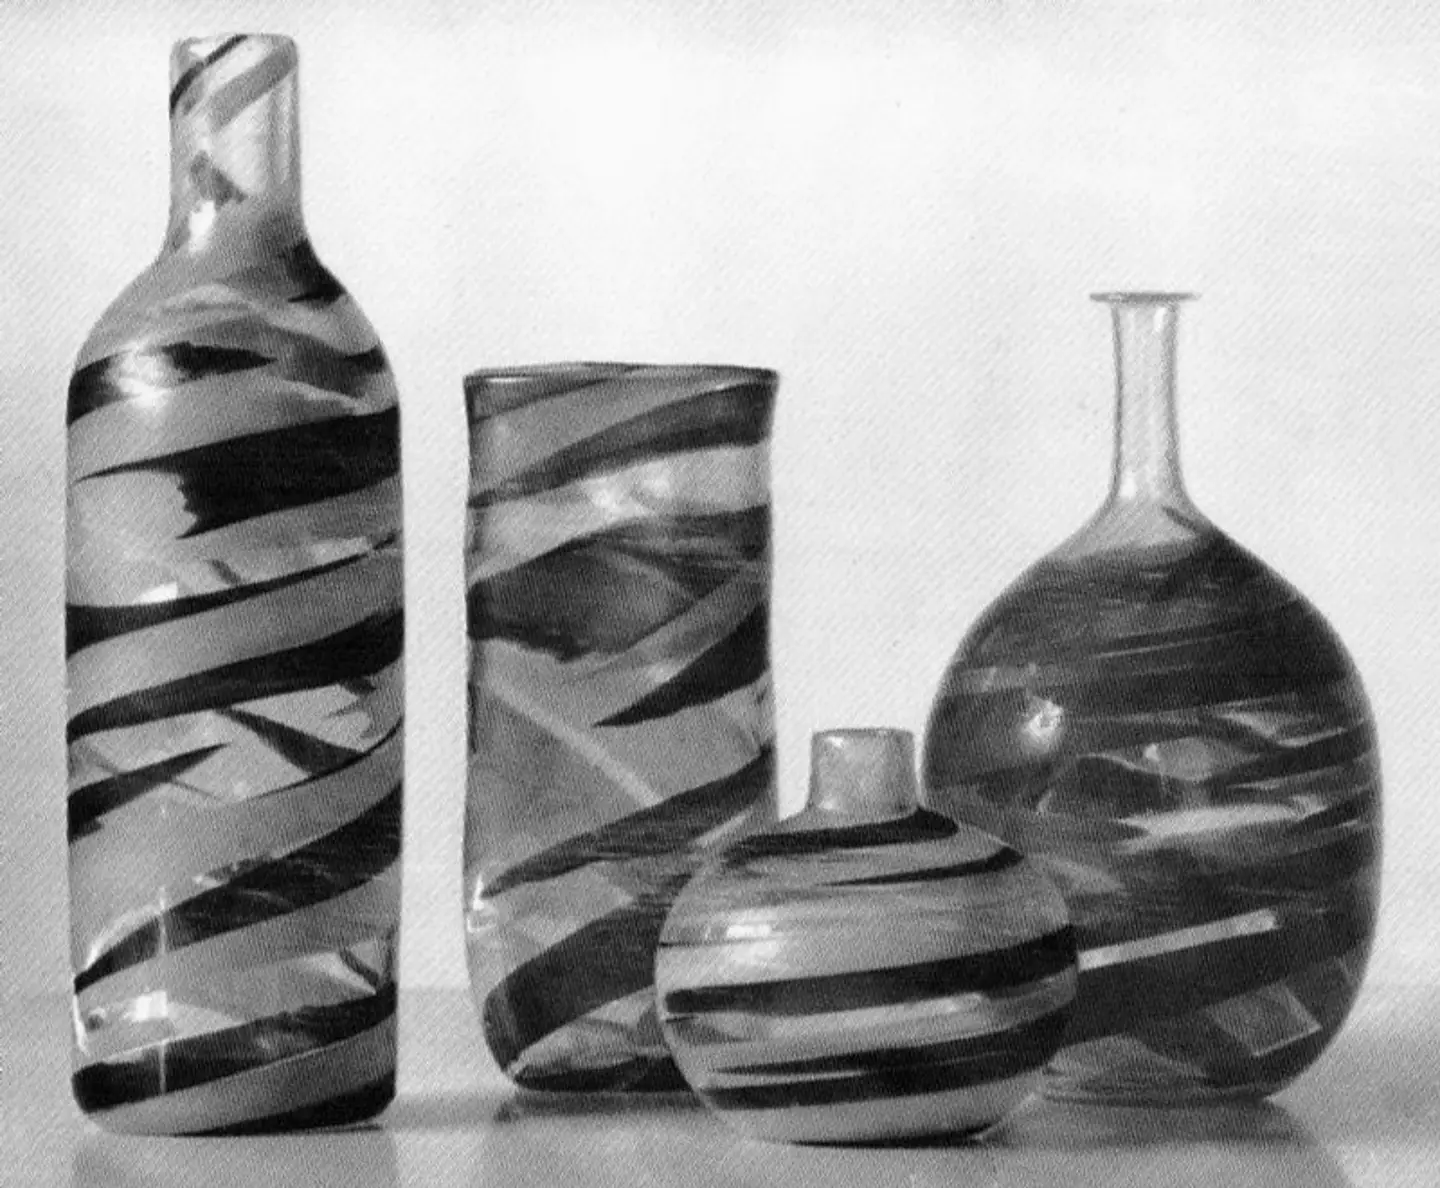 Vases and bottles from the Pennellate series, 1950s.